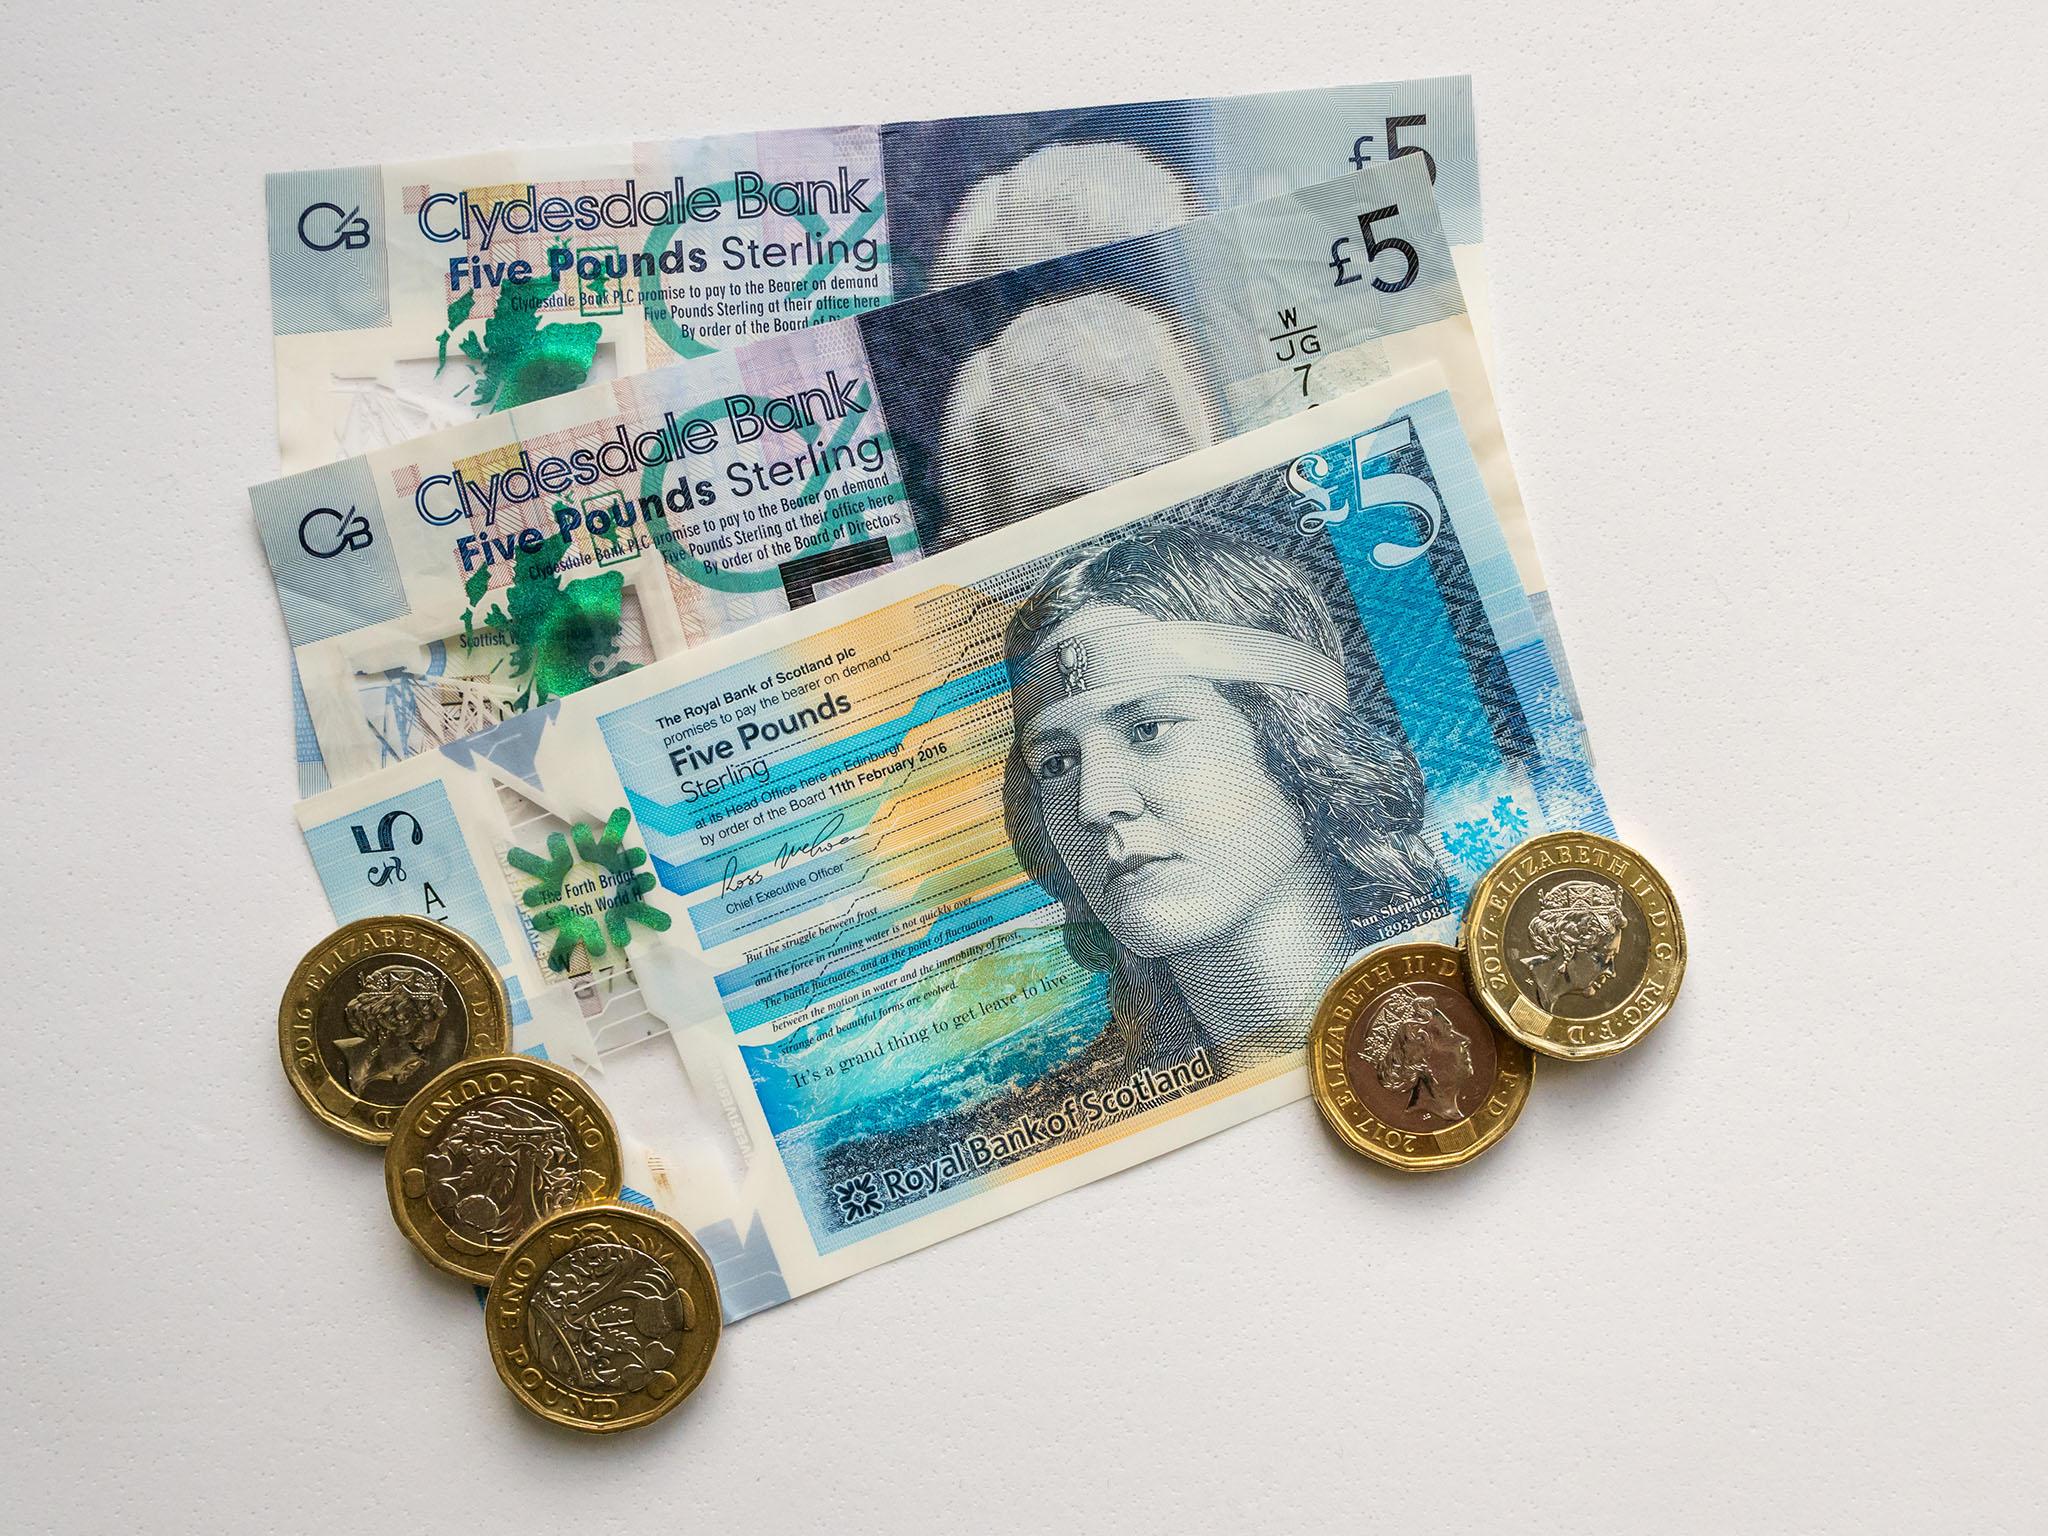 In 2016, the Royal Bank of Scotland used a striking image of the poet wearing a self-made headband, looking proud and confident on its new £5 note